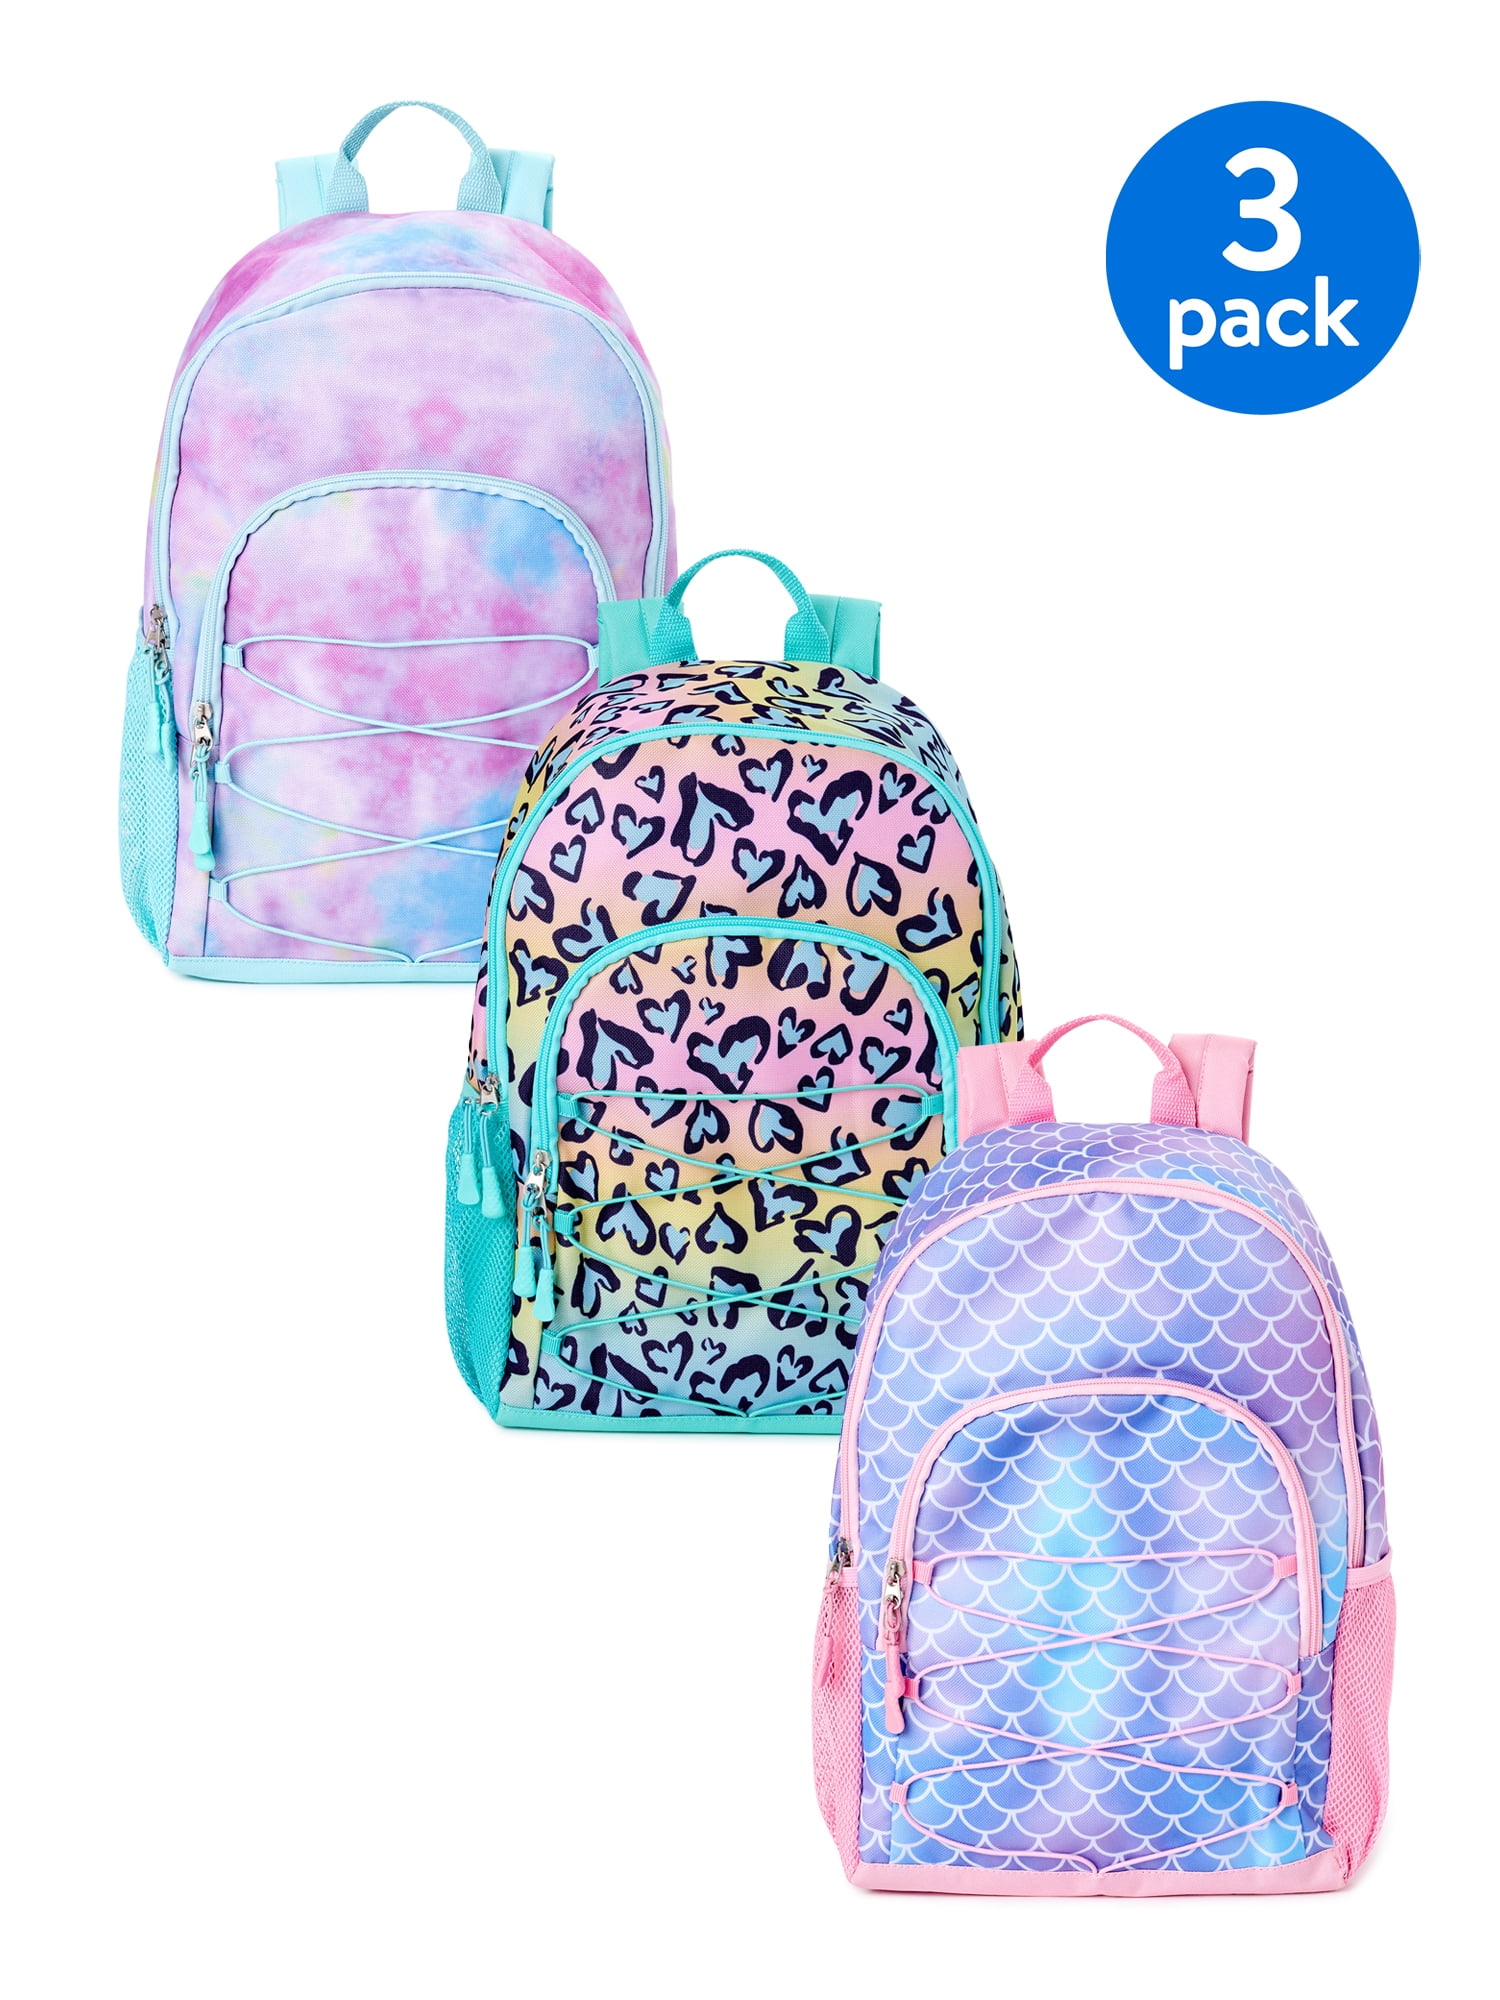 HUGS IDEA Teens Backpack with Lunch Bag Set Sunglasses White Tiger Print Kids School Bag Bookbag with Lunchbox